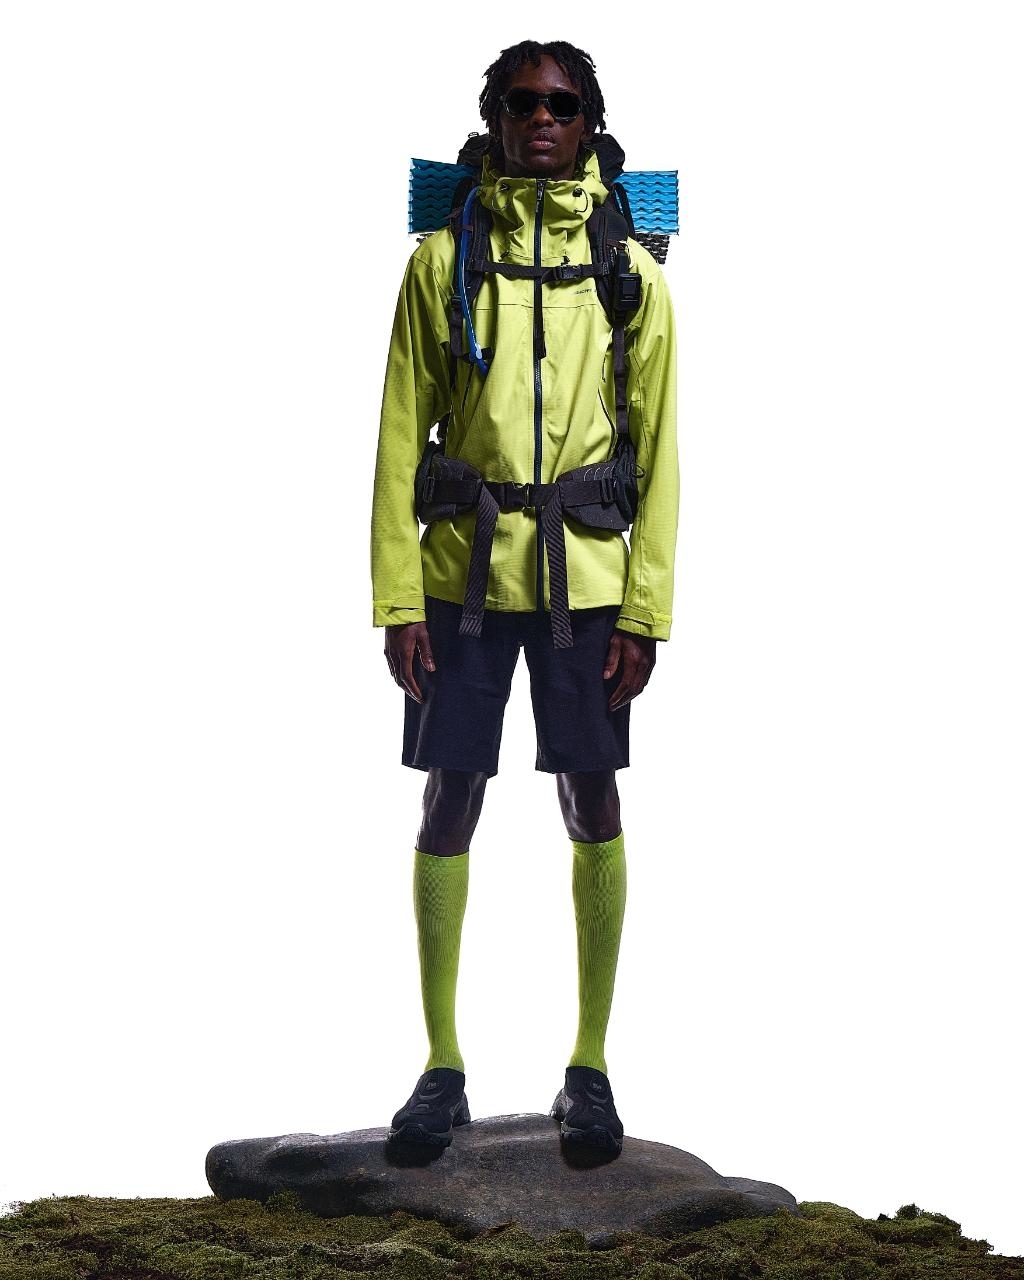 Person in hiking gear with backpack standing on a rock